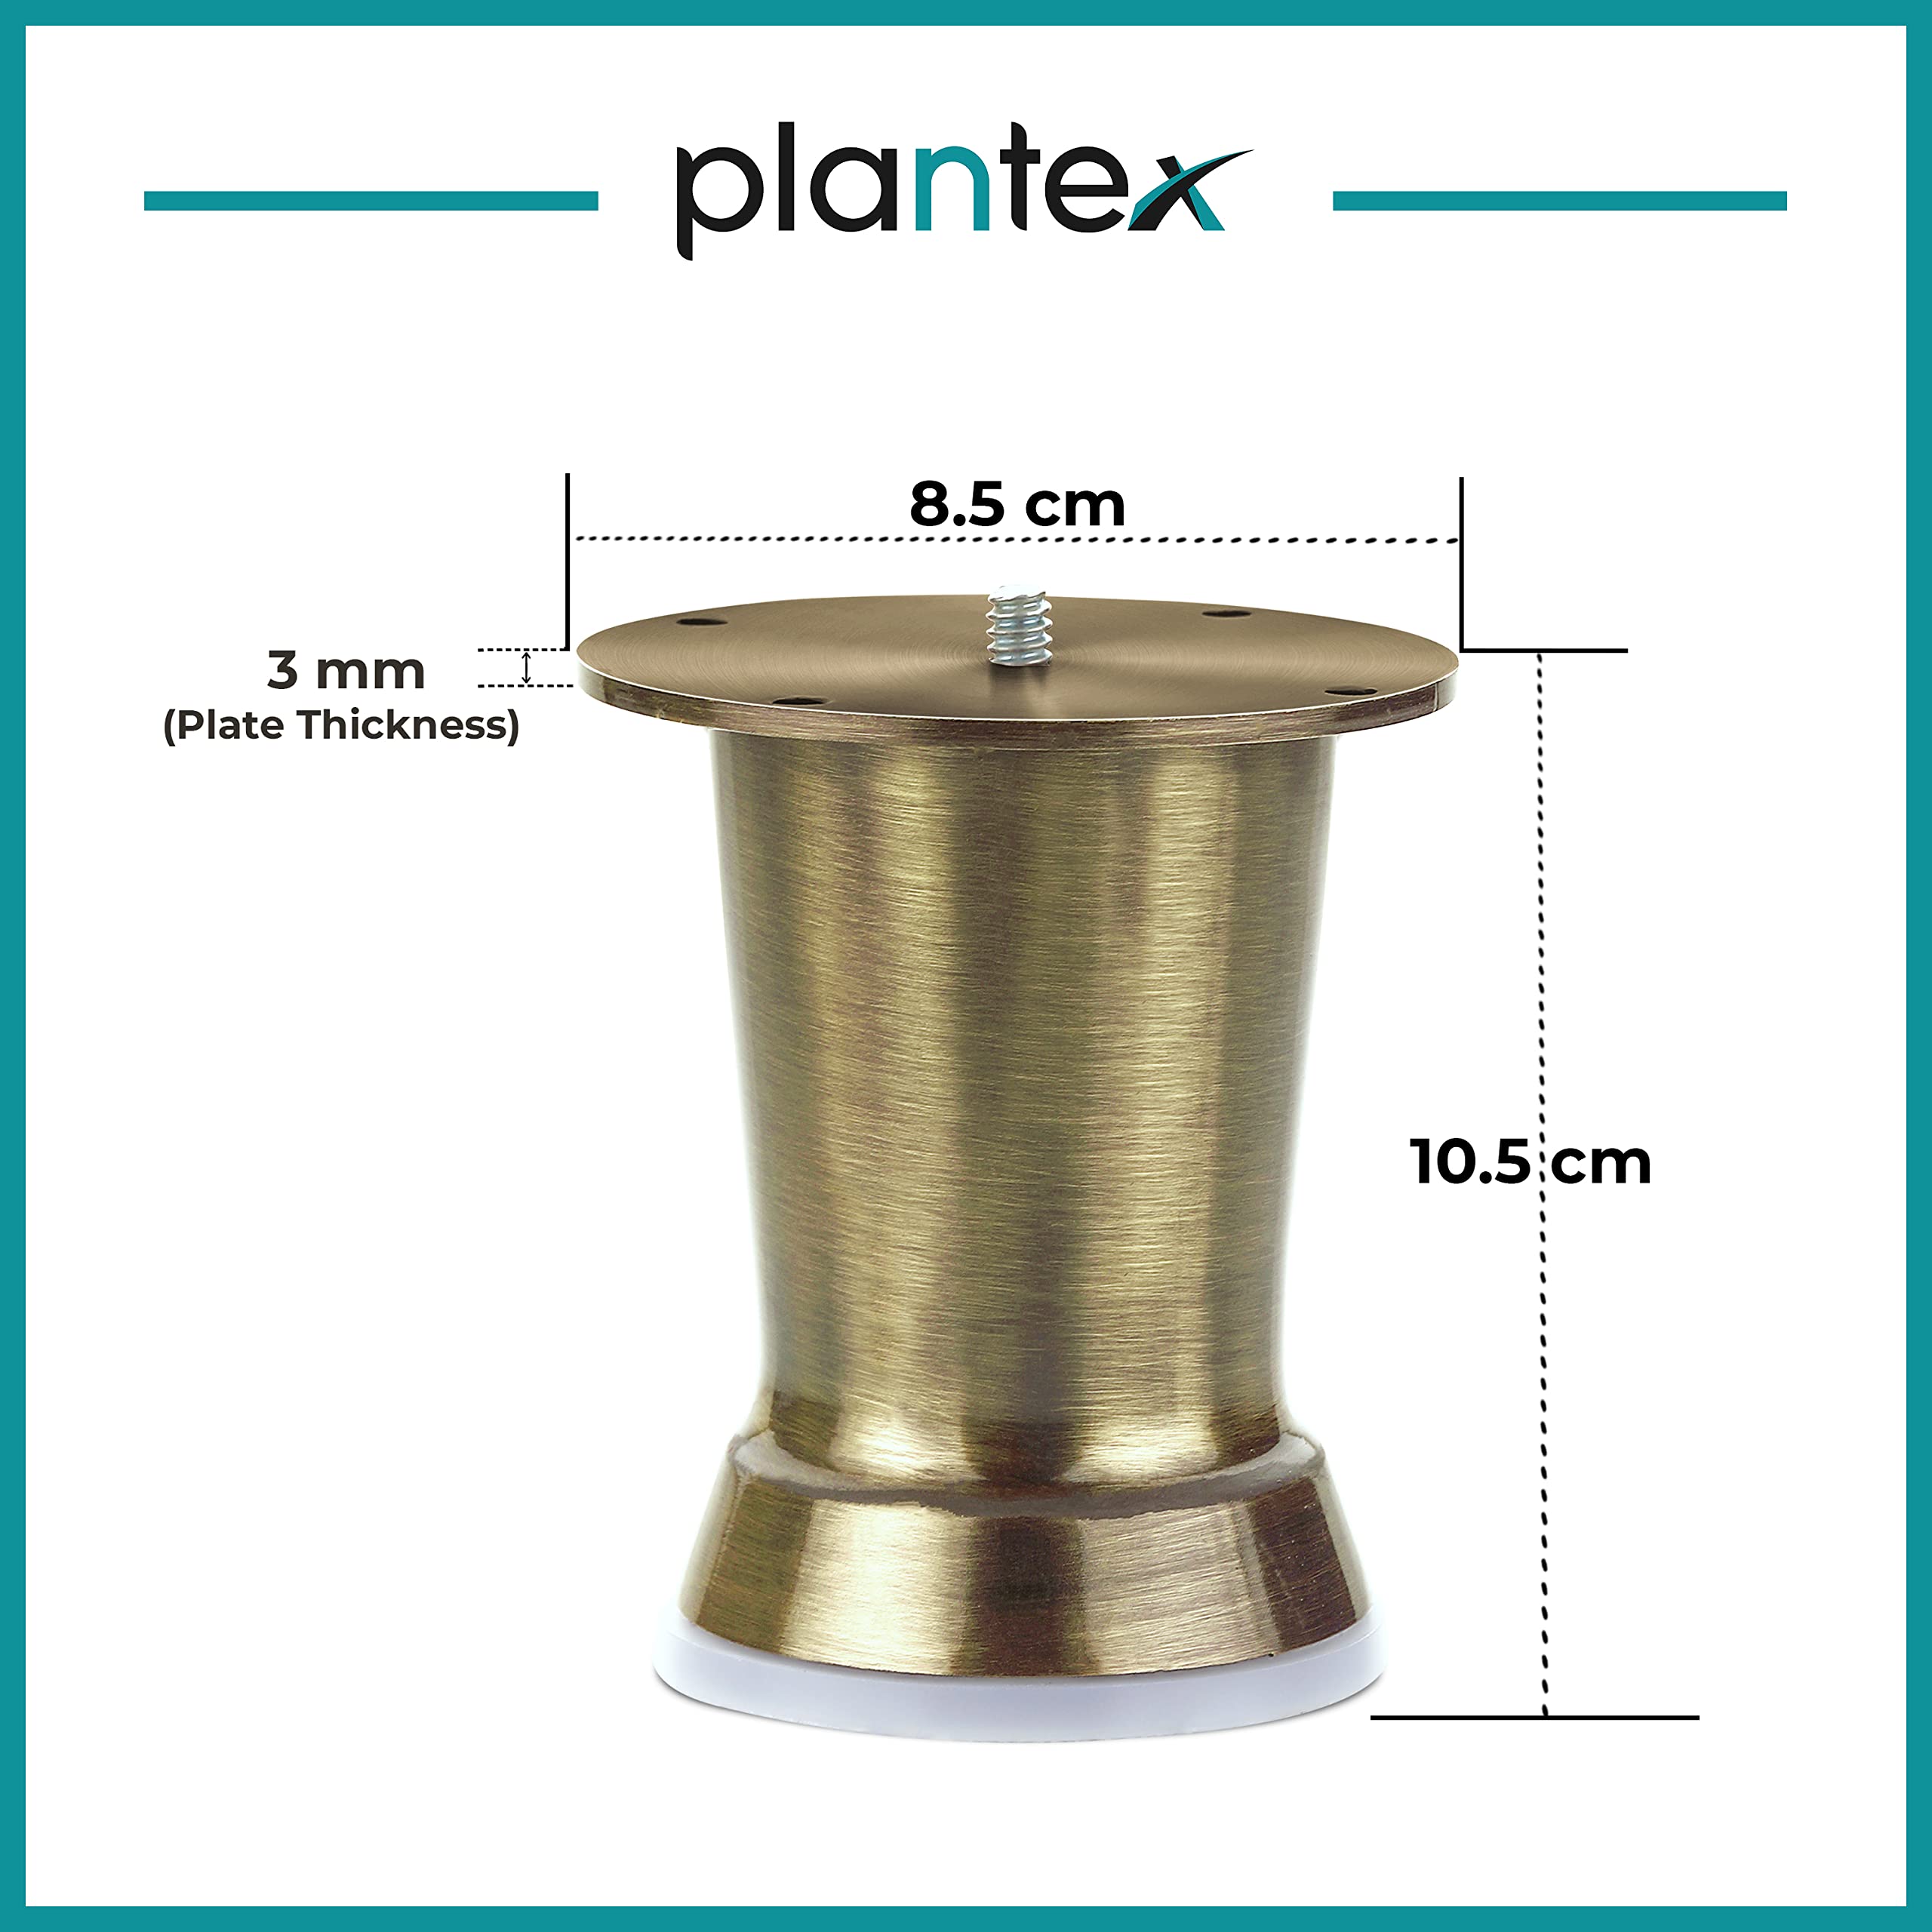 Plantex Heavy Duty Stainless Steel 4 inch Sofa Leg/Bed Furniture Leg Pair for Home Furnitures (DTS-51, Brass Antique) – Pcs - 8